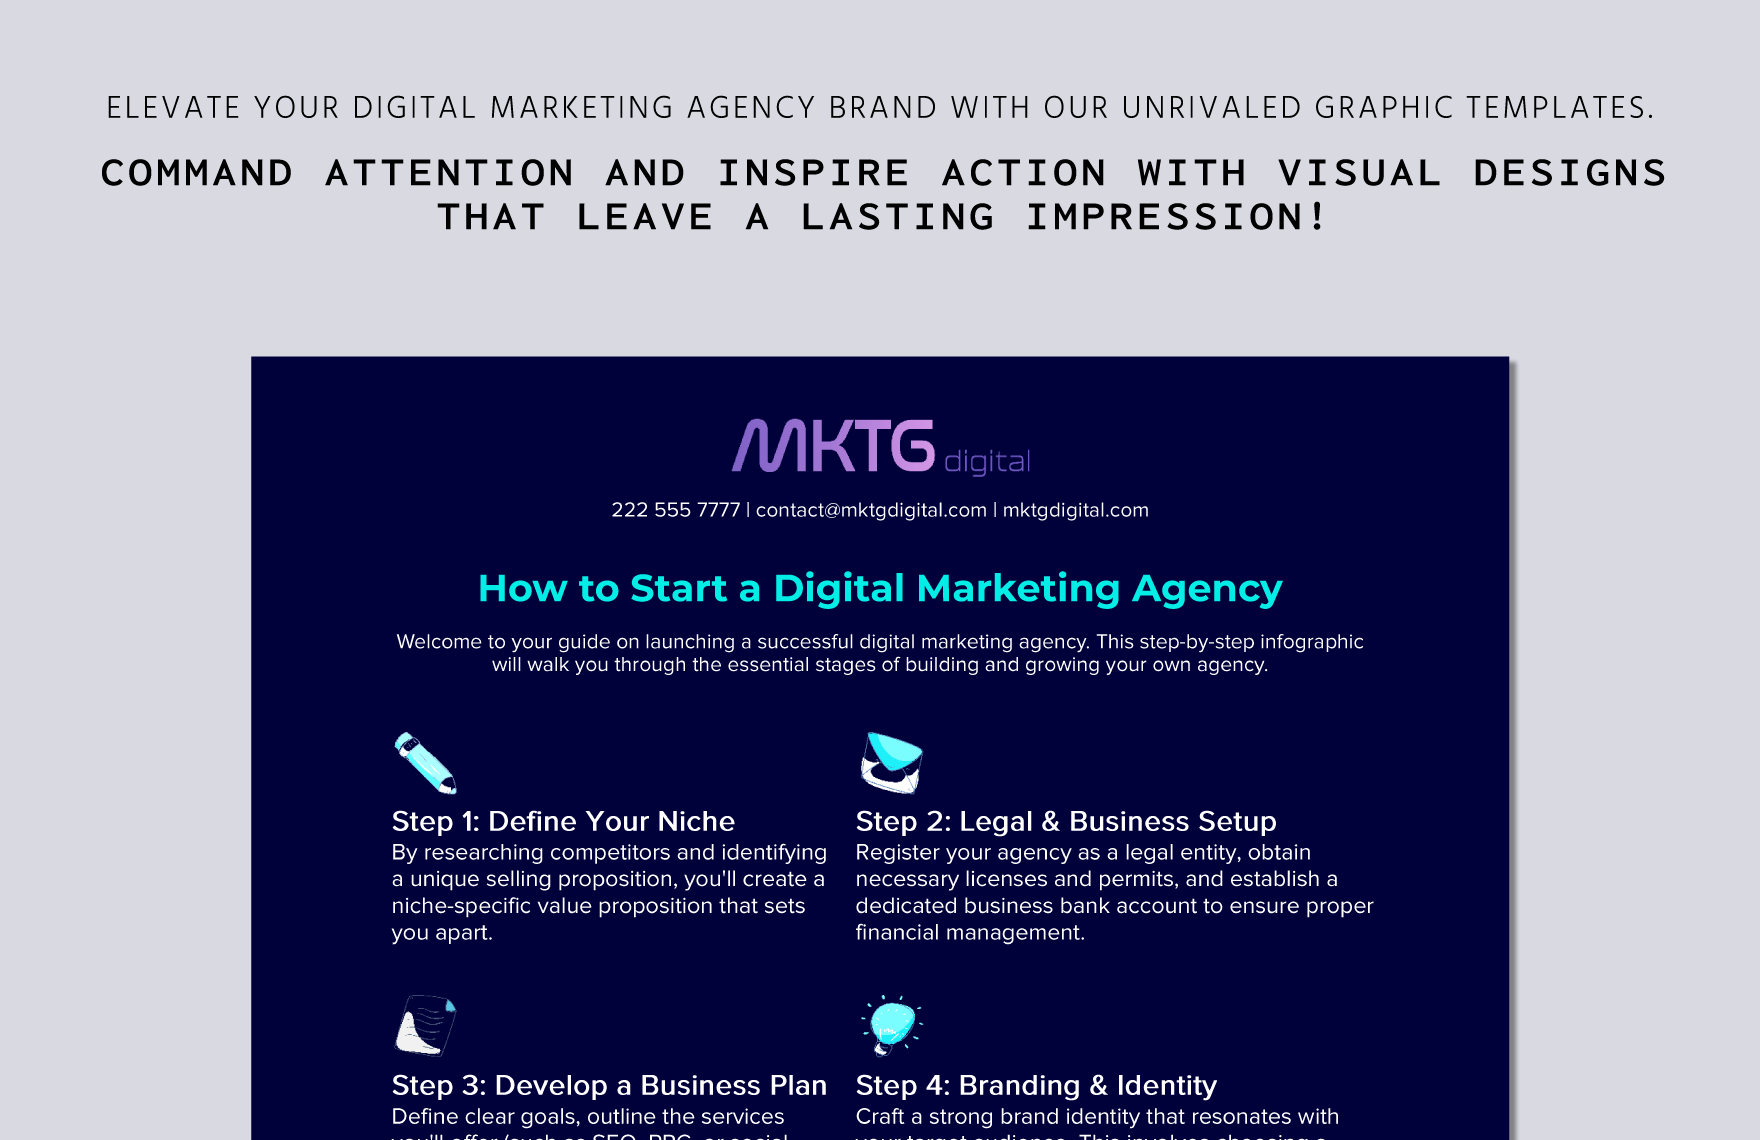 Digital Marketing Agency How-To Infographic Template